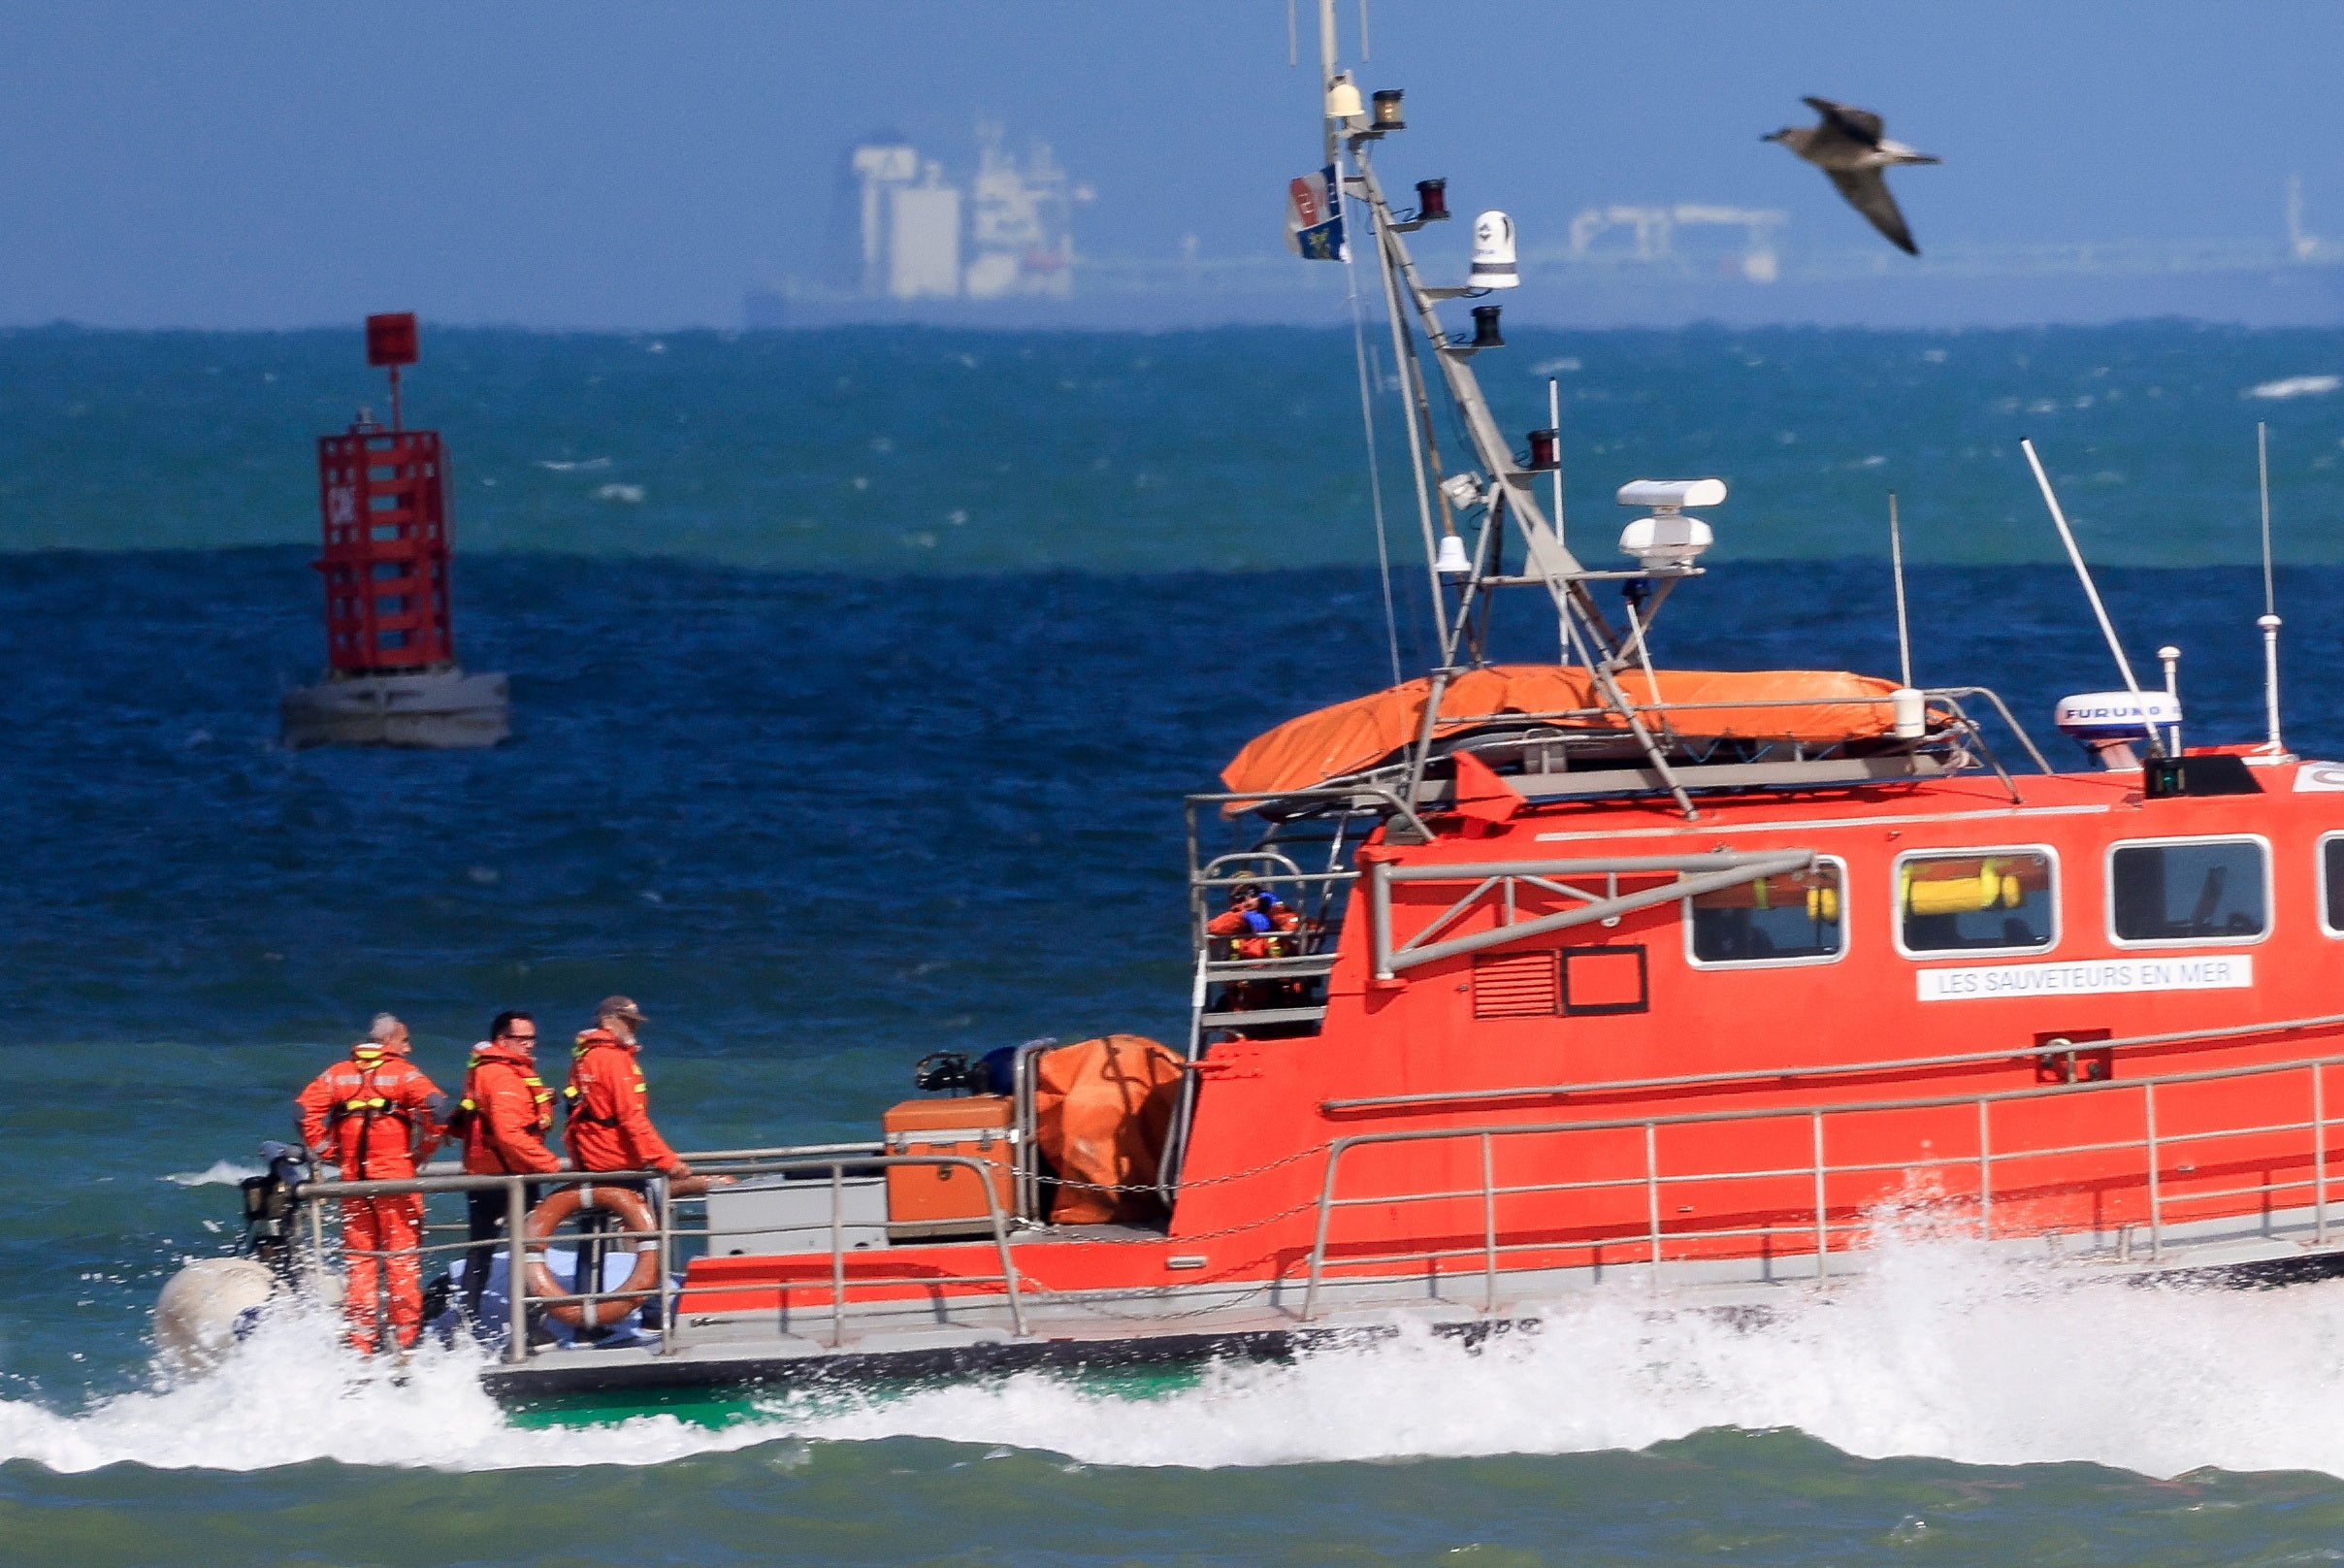 ‘Notre Dame du Risban’, an SNSM lifeboat, enters the port of Calais following a rescue operation after a migrant boat trying to cross the Channel from France capsized